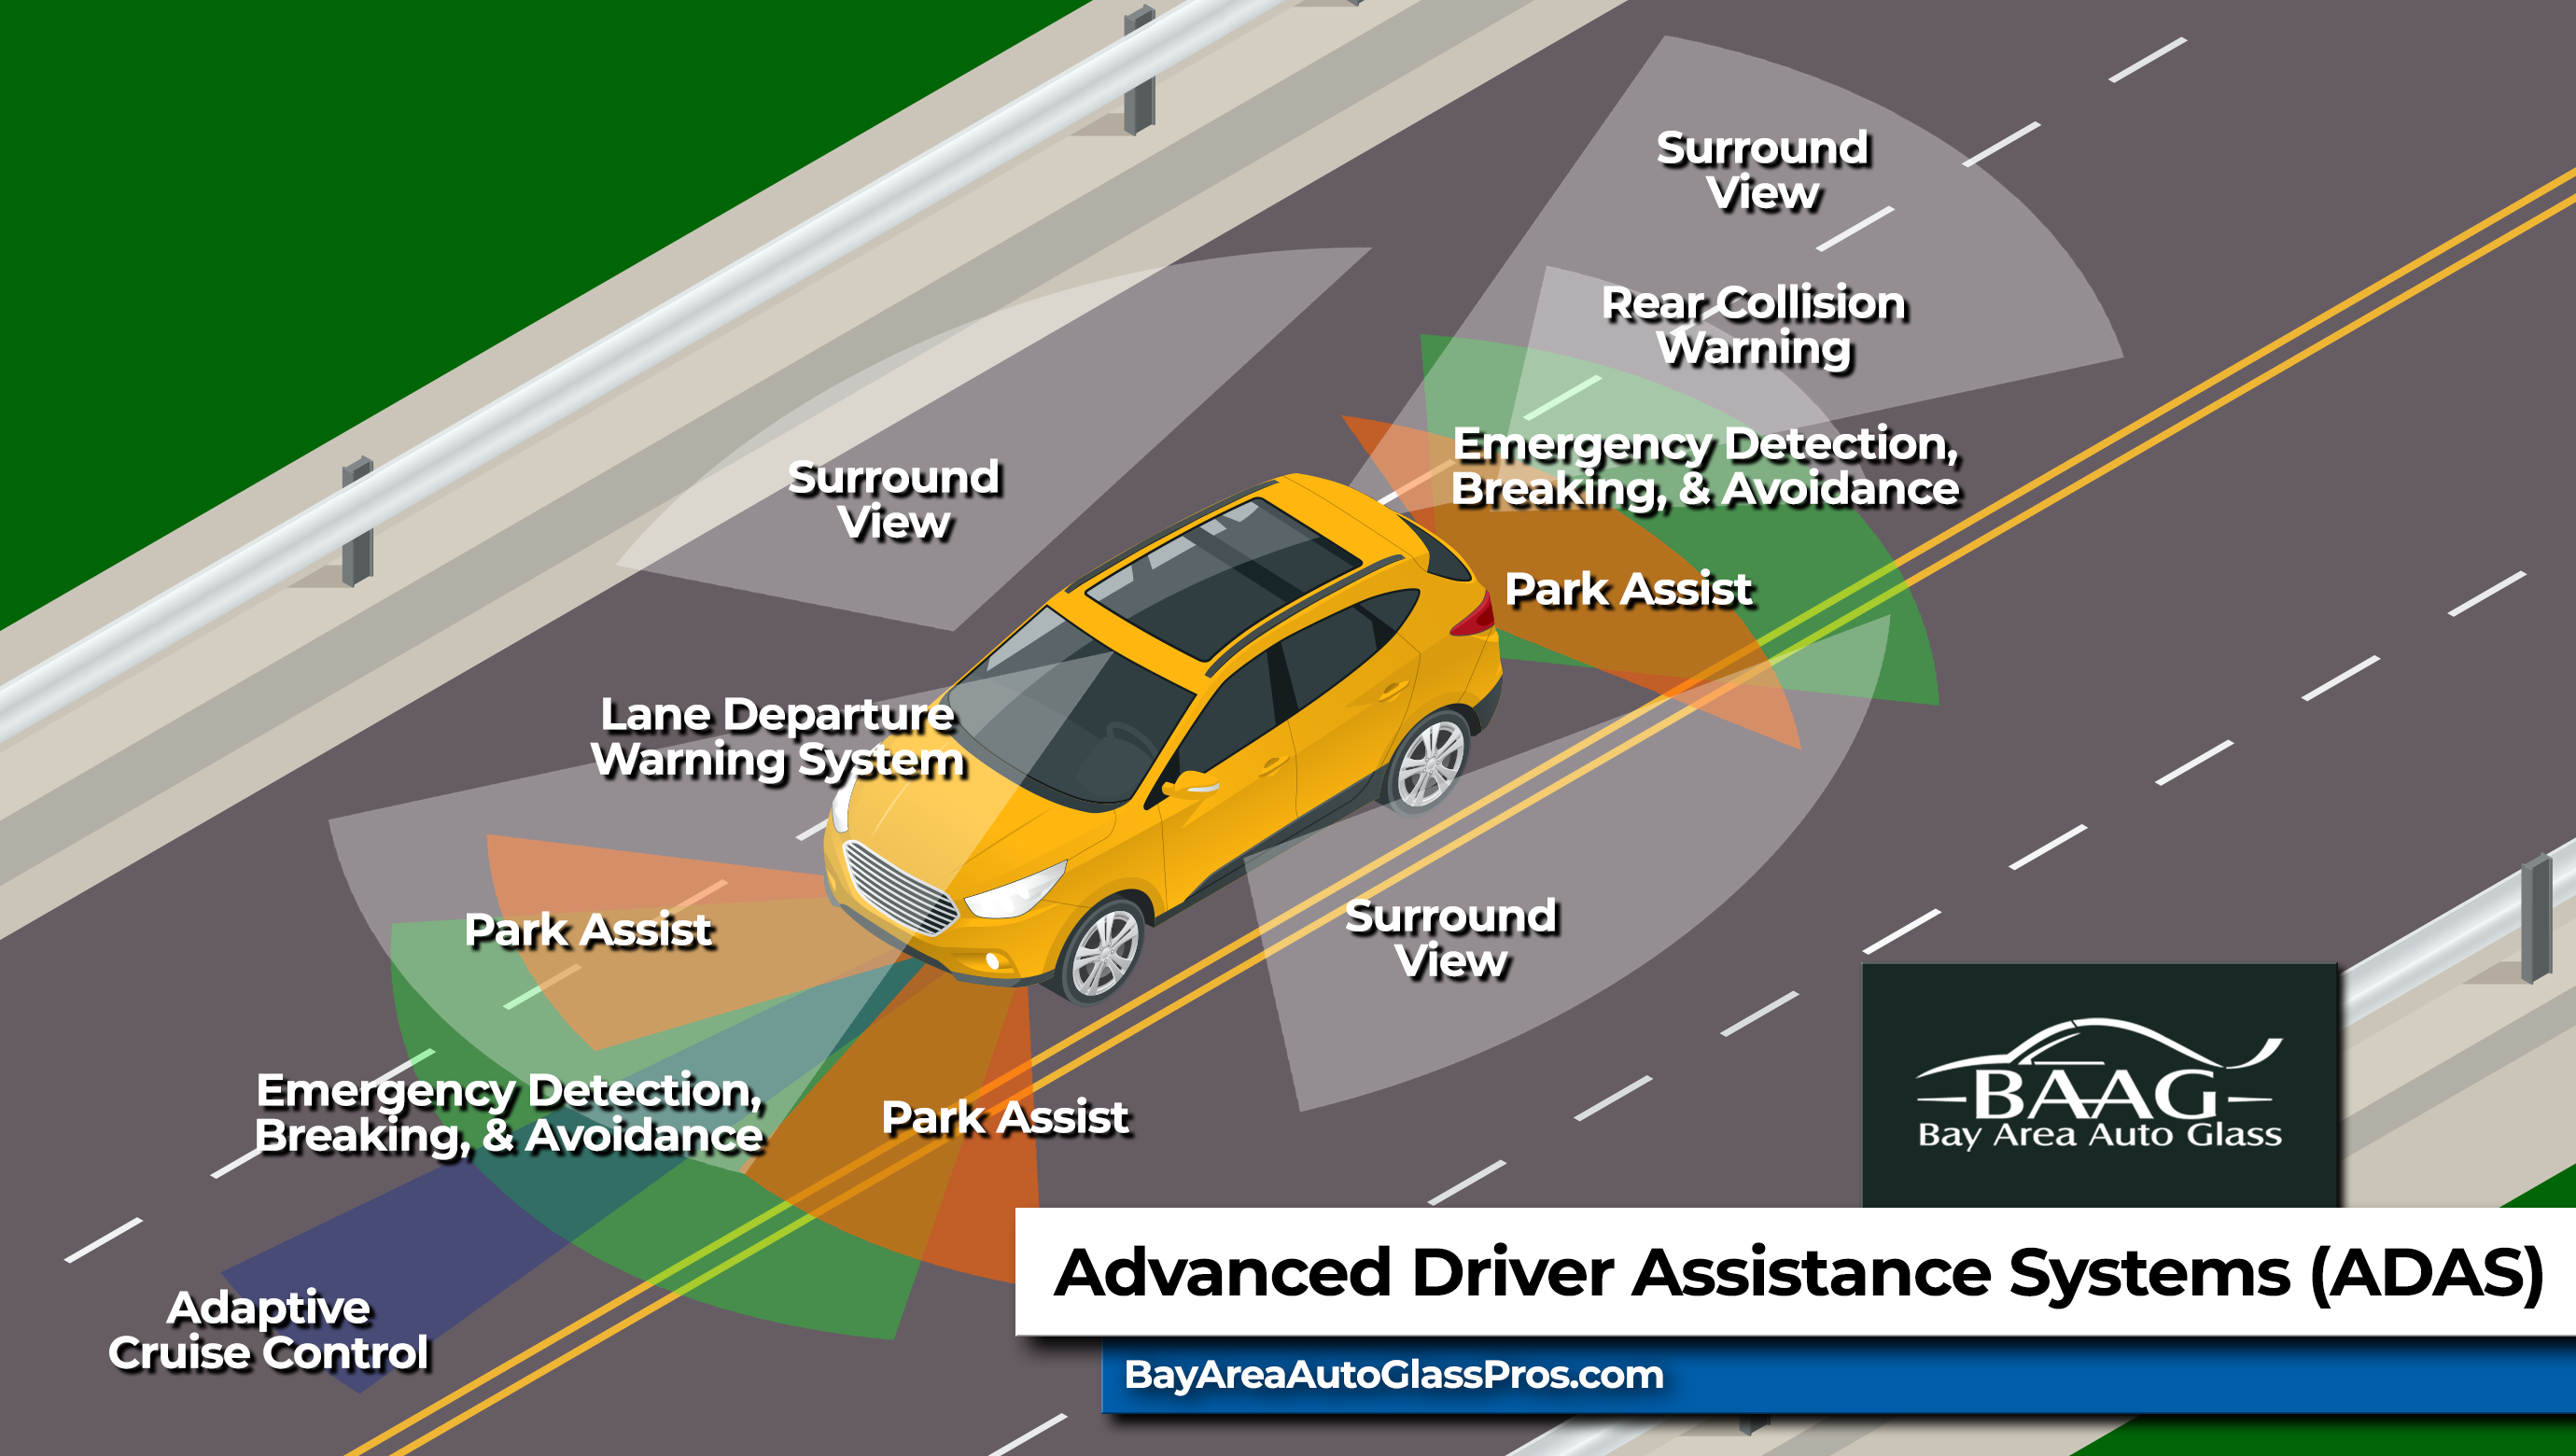 Advanced Driver Assistance Systems (ADAS) usually need sensor recalibration after a windshield replacement.